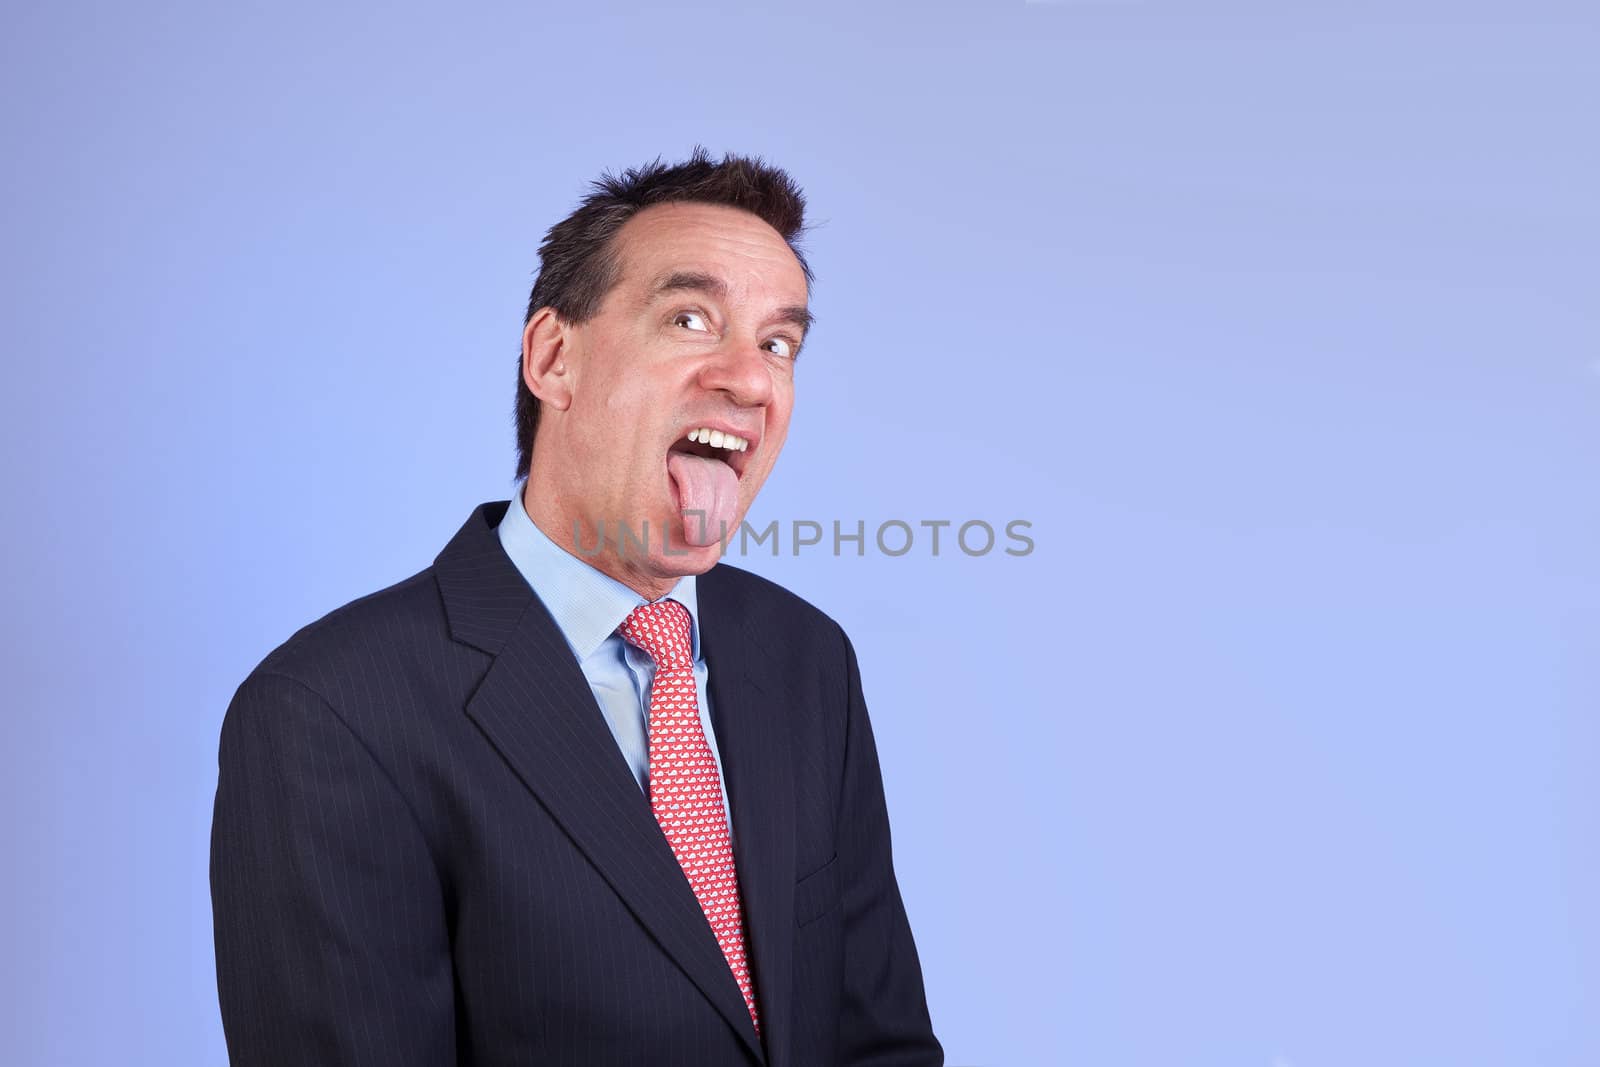 Attractive Business Man in Suit Sticking out Tongue on Blue Background